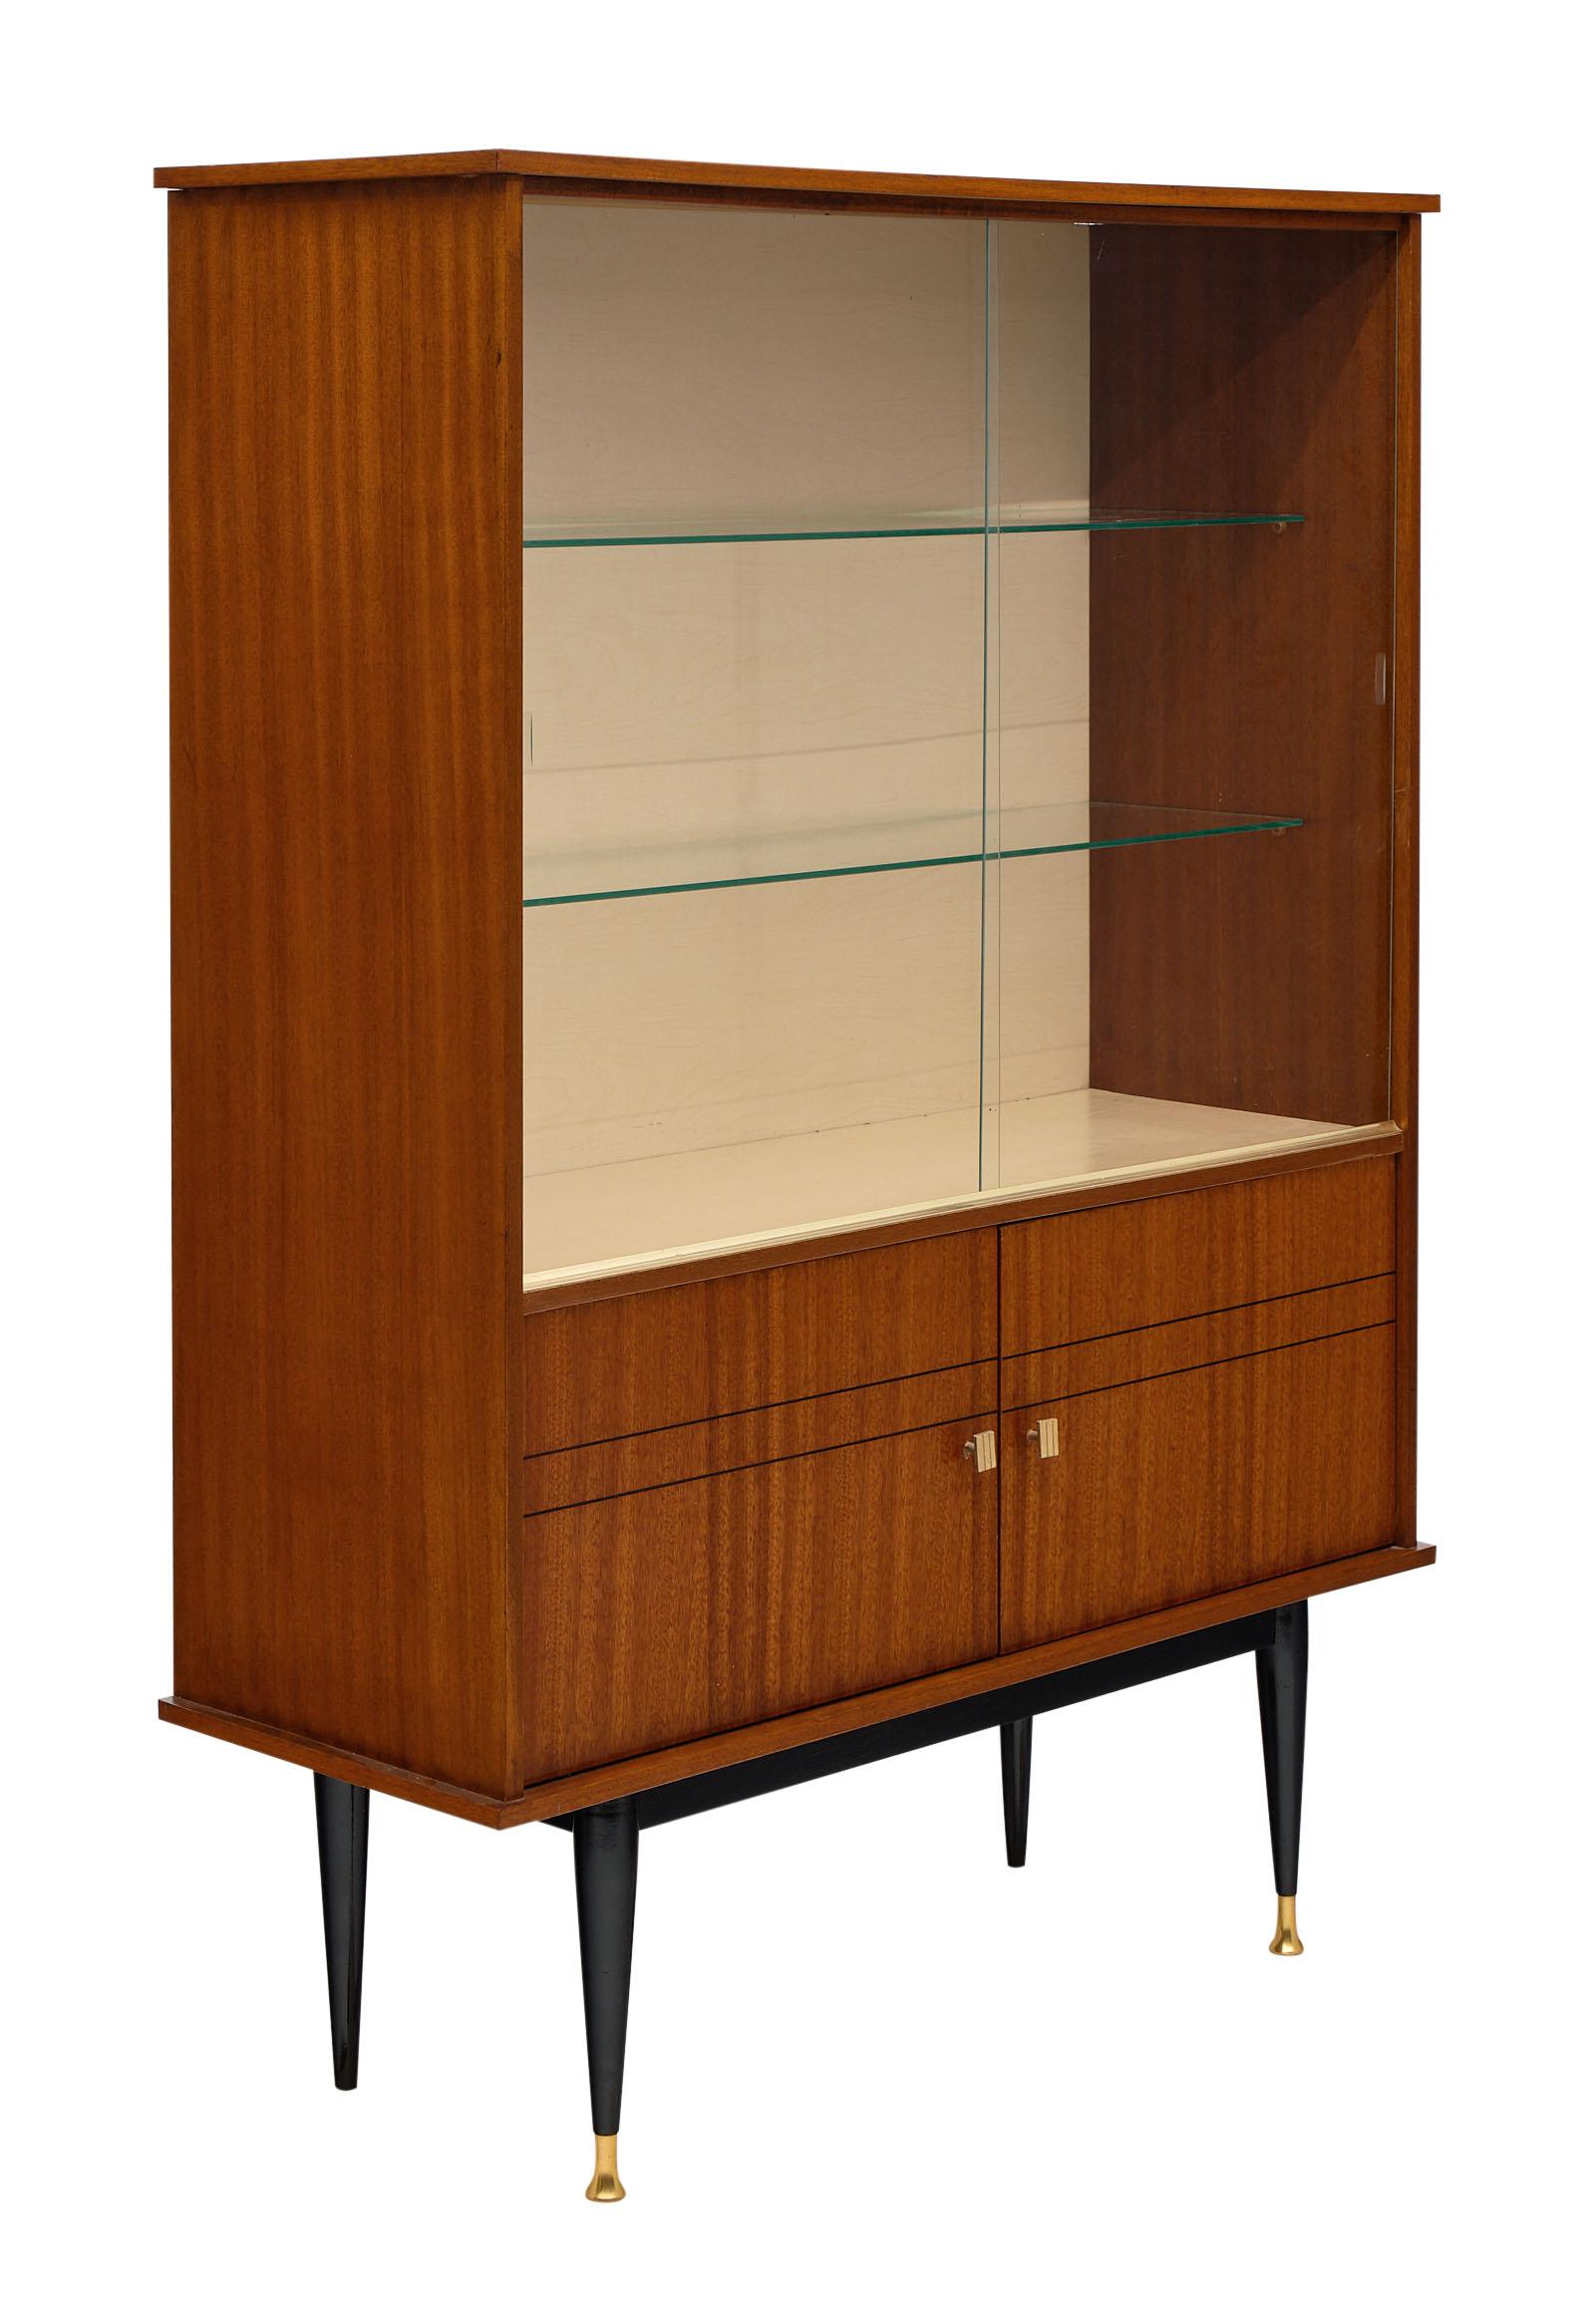 Mid-Century rosewood French silver cabinet with glass shelving behind two original glass sliding doors. We love the detail of this elegant piece and the tapered; ebonized legs capped with brass. the bottom doors open out for additional storage.